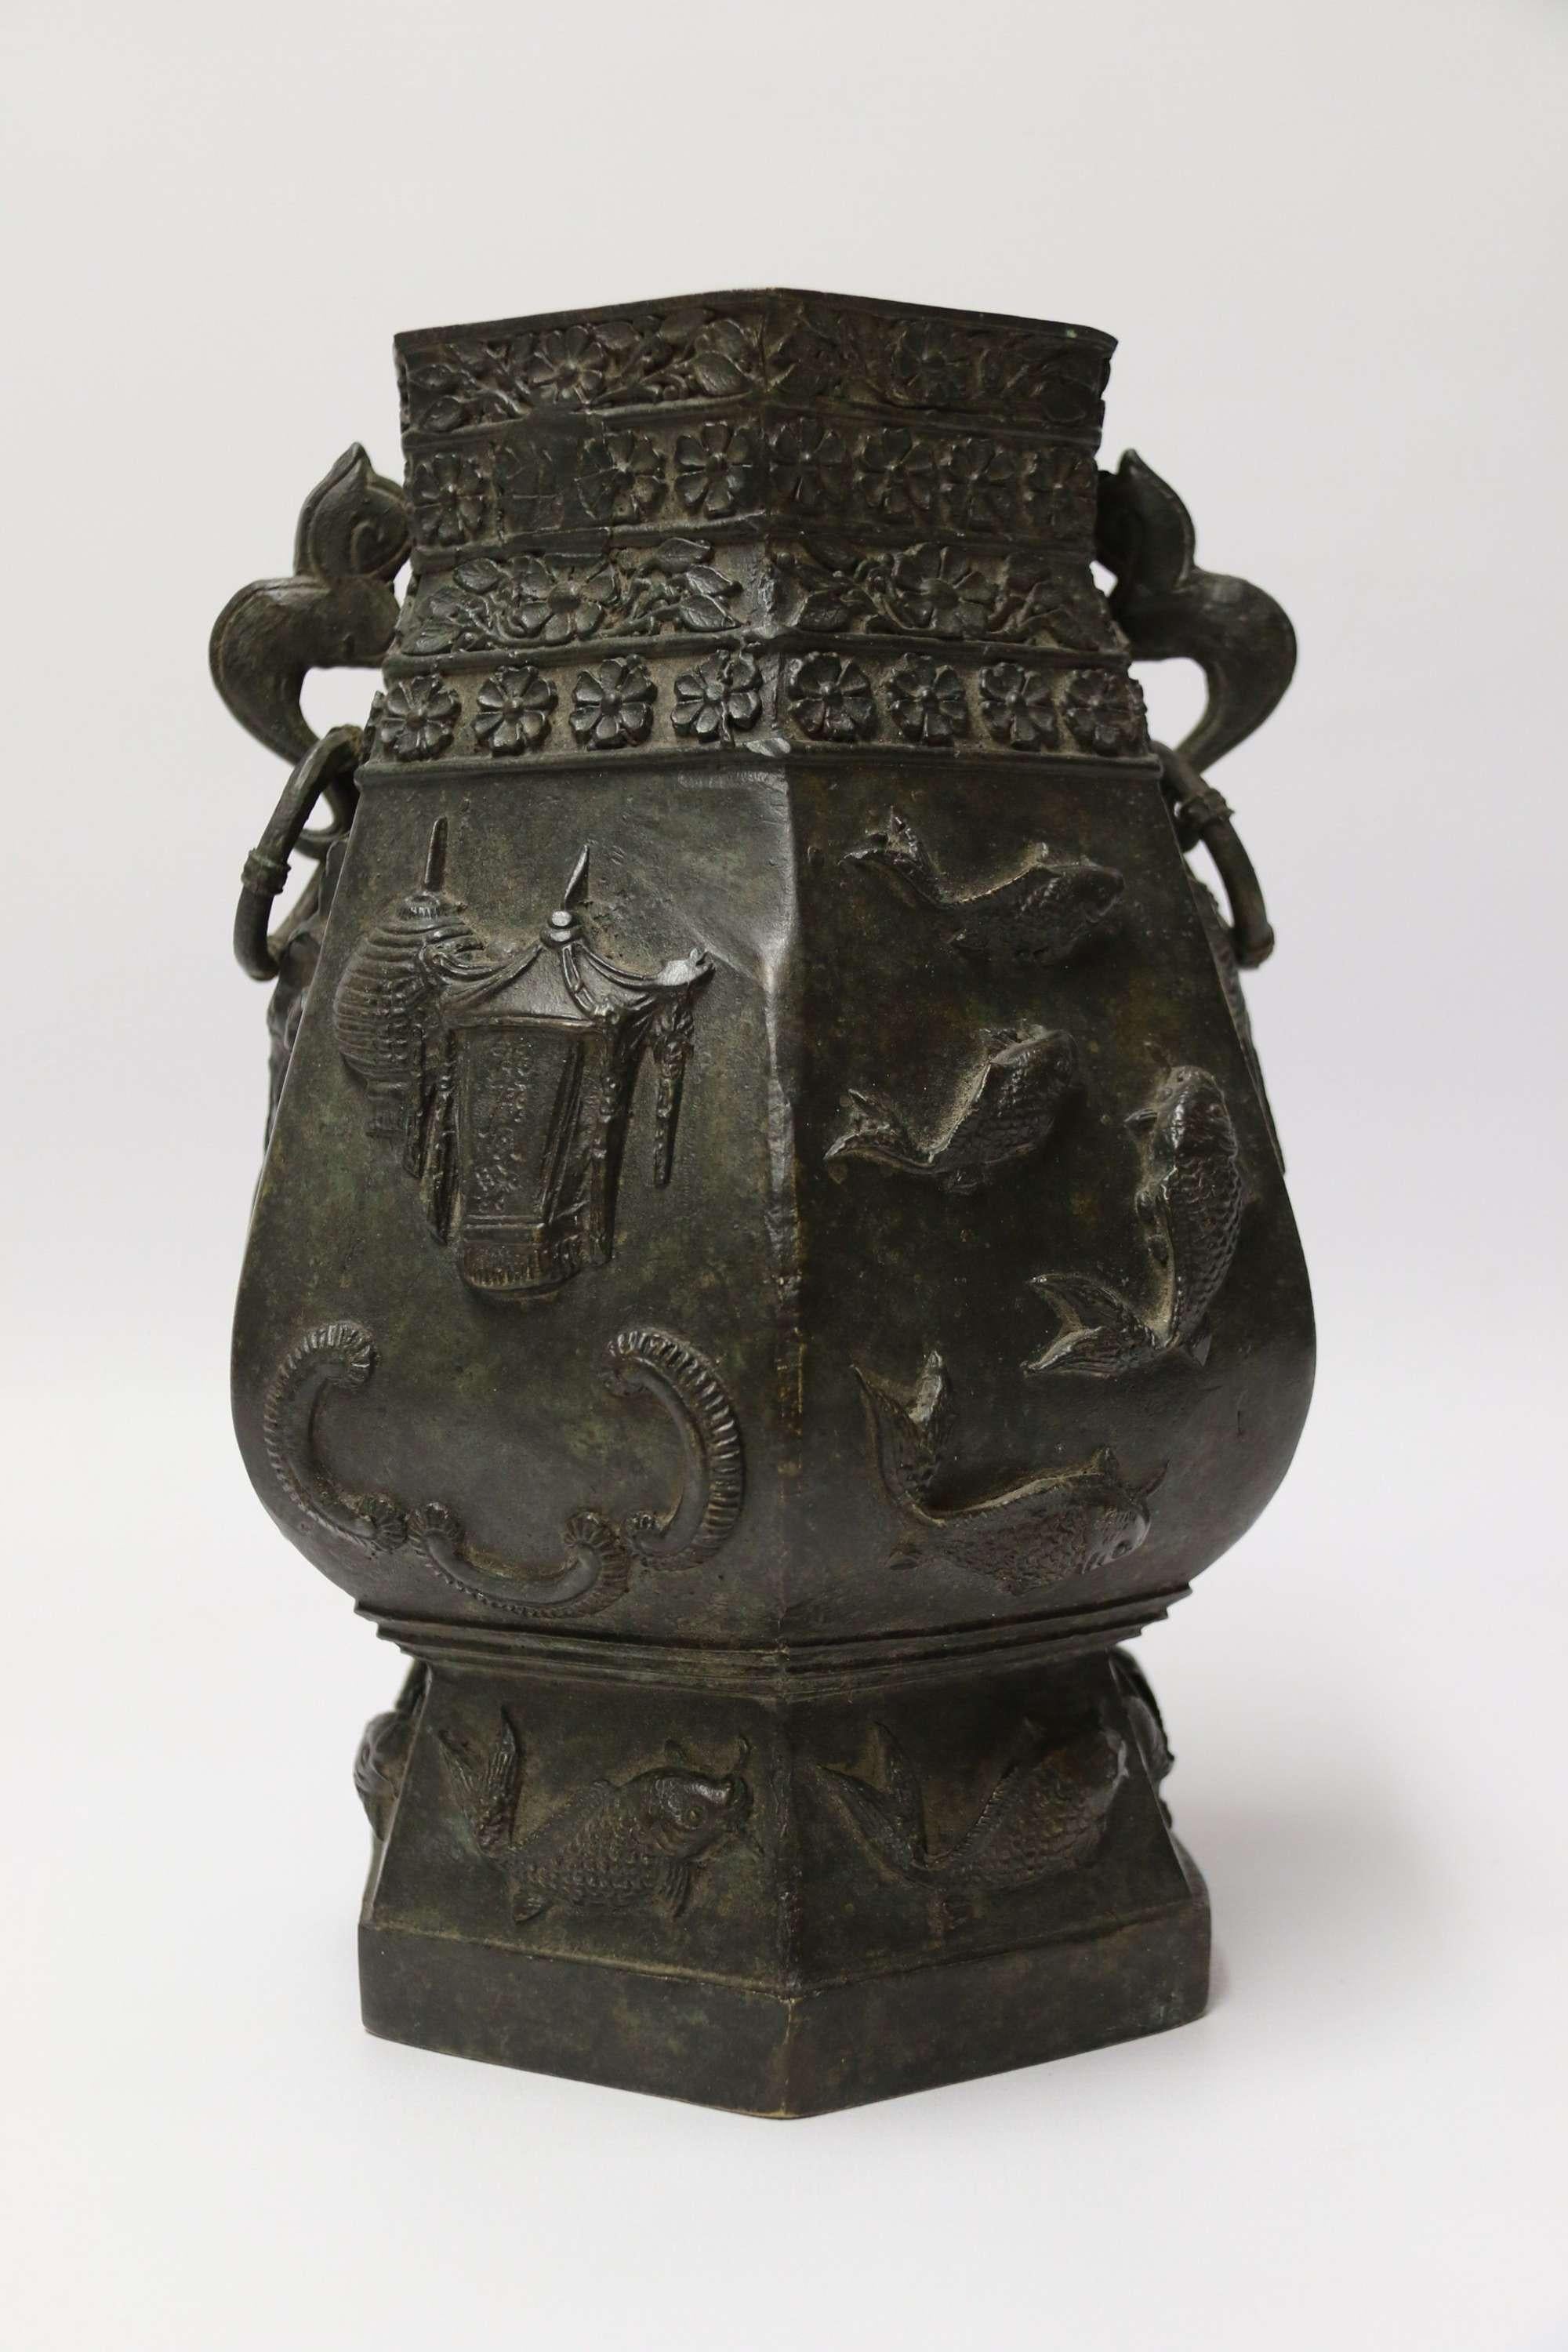 A Chinese Finely Cast 19th century bronze vessel

This bold and stylish Chinese shaped hexagonal vessel is heavily cast in solid bronze. It has a very pleasing shape which is enhanced by the pair of decorative ring handle mounts to each side. At